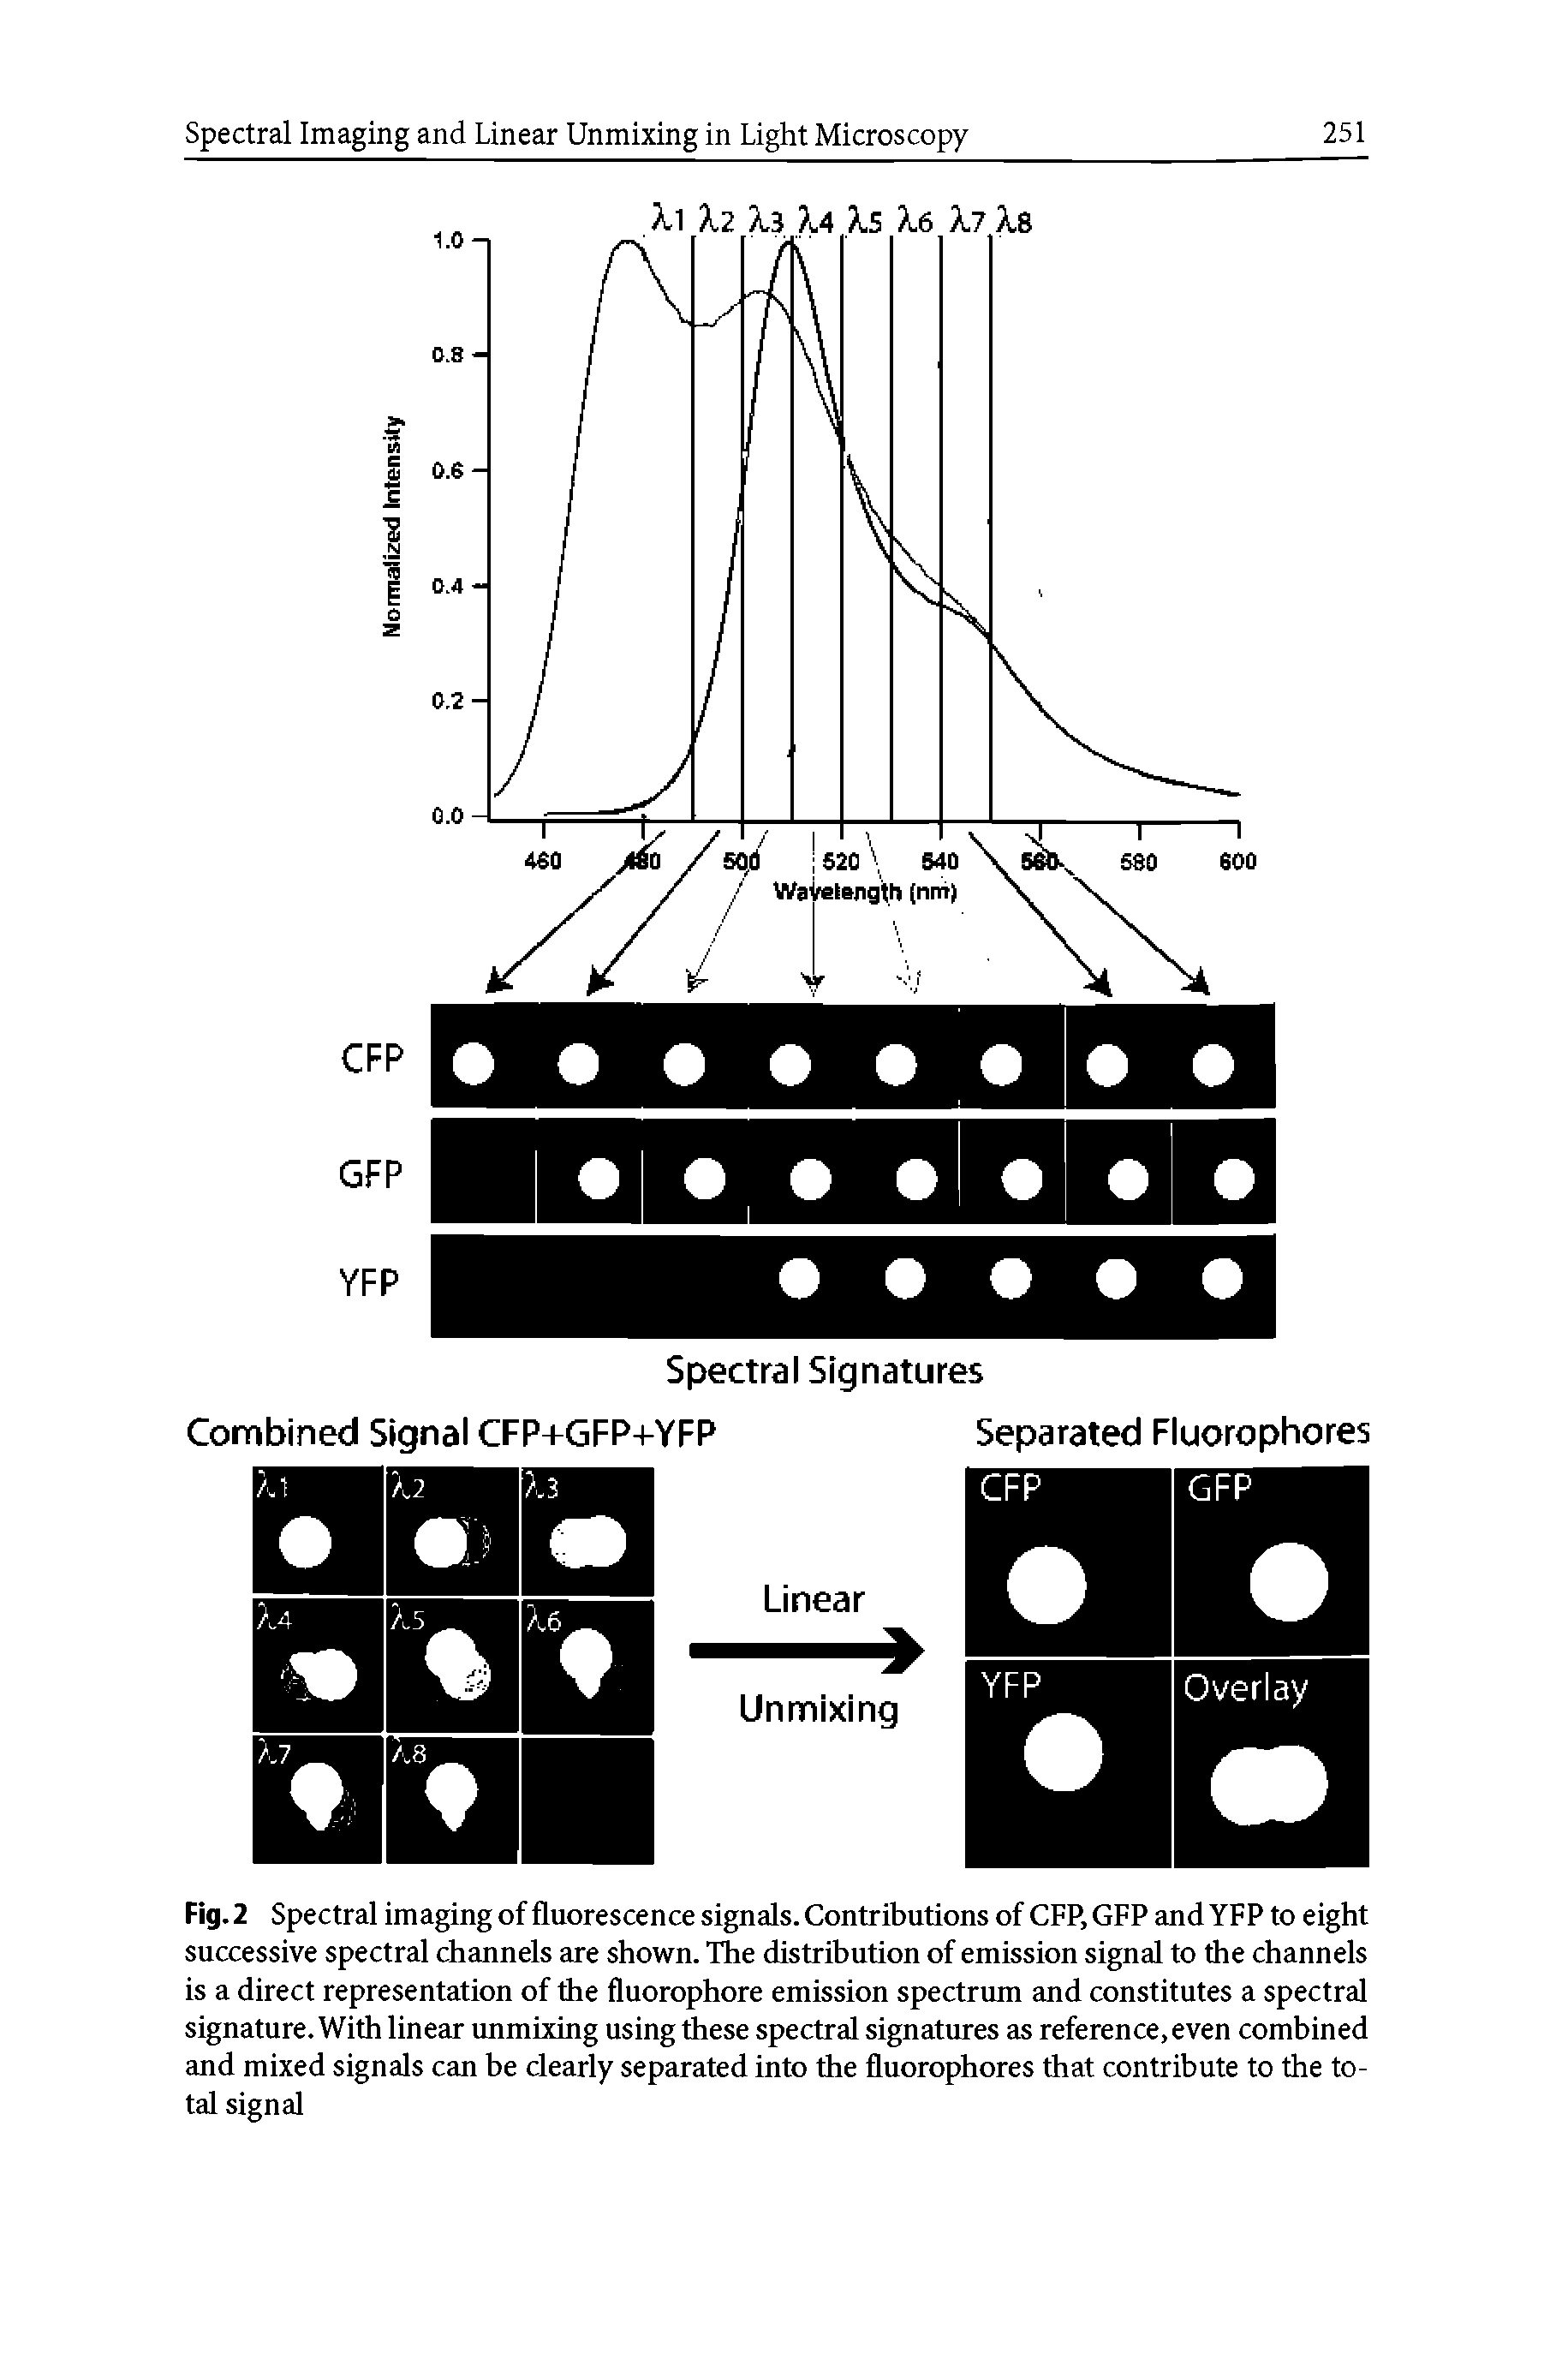 Fig. 2 Spectral imaging of fluorescence signals. Contributions of CFP, GFP and YFP to eight successive spectral channels are shown. The distribution of emission signal to the channels is a direct representation of the fluorophore emission spectrum and constitutes a spectral signature. With linear unmixing using these spectral signatures as reference, even combined and mixed signals can be clearly separated into the fluorophores that contribute to the total signal...